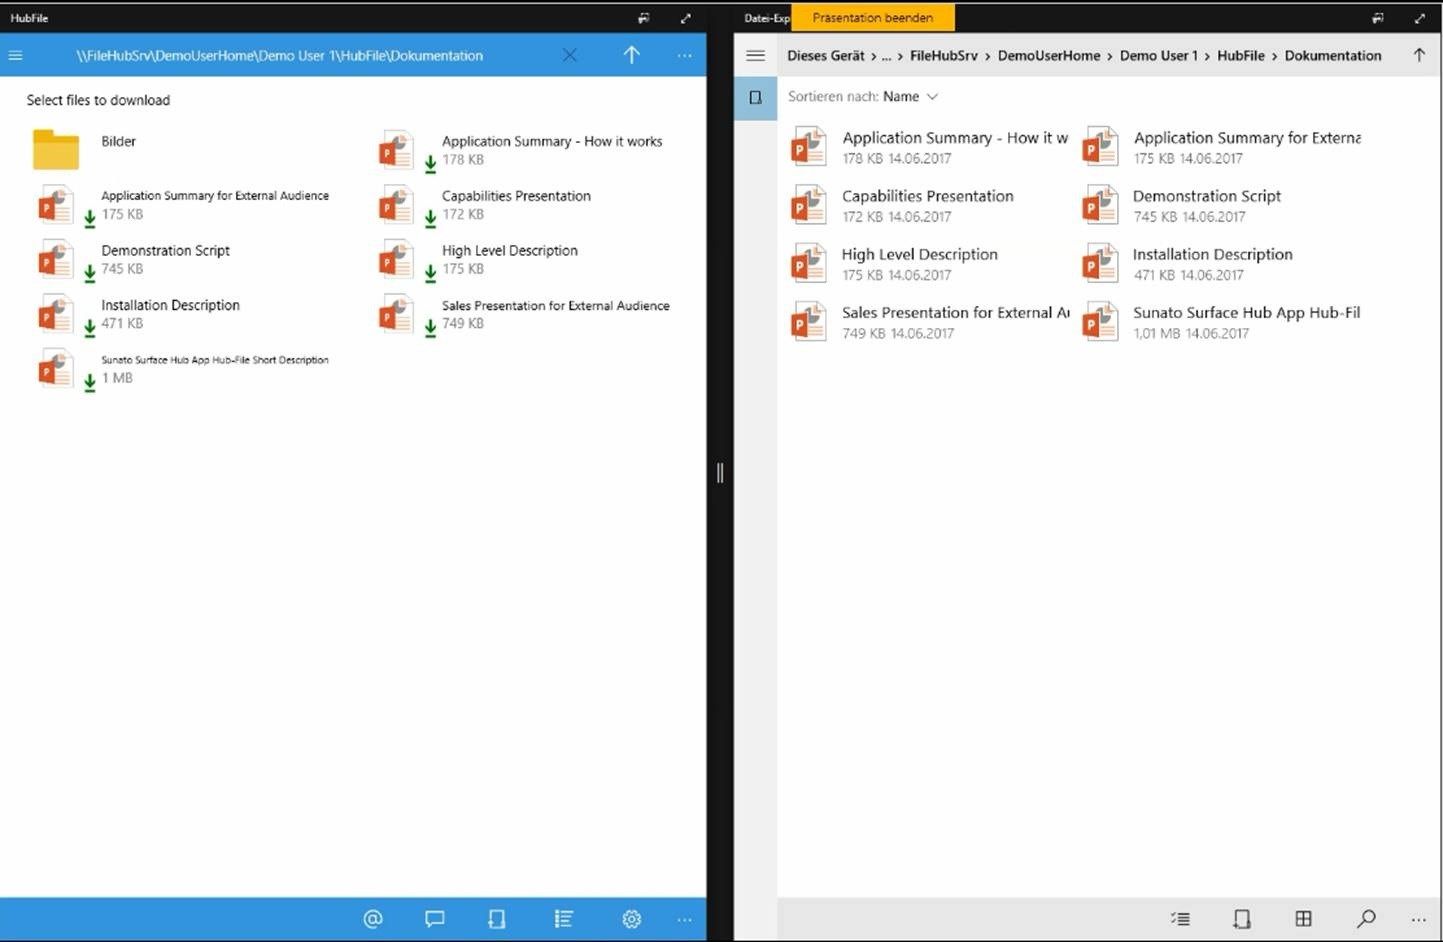 Left: HubFile (view on file server), right: Explorer App on the Surface Hub

PowerPoints have been downloaded, folder „Bilder“ has not been downloaded yet. 

Long file names in HubFile are fully readable, long filenames in Explorer App are cut.

The user can take either HubFile or the Explorer App to open his documents.